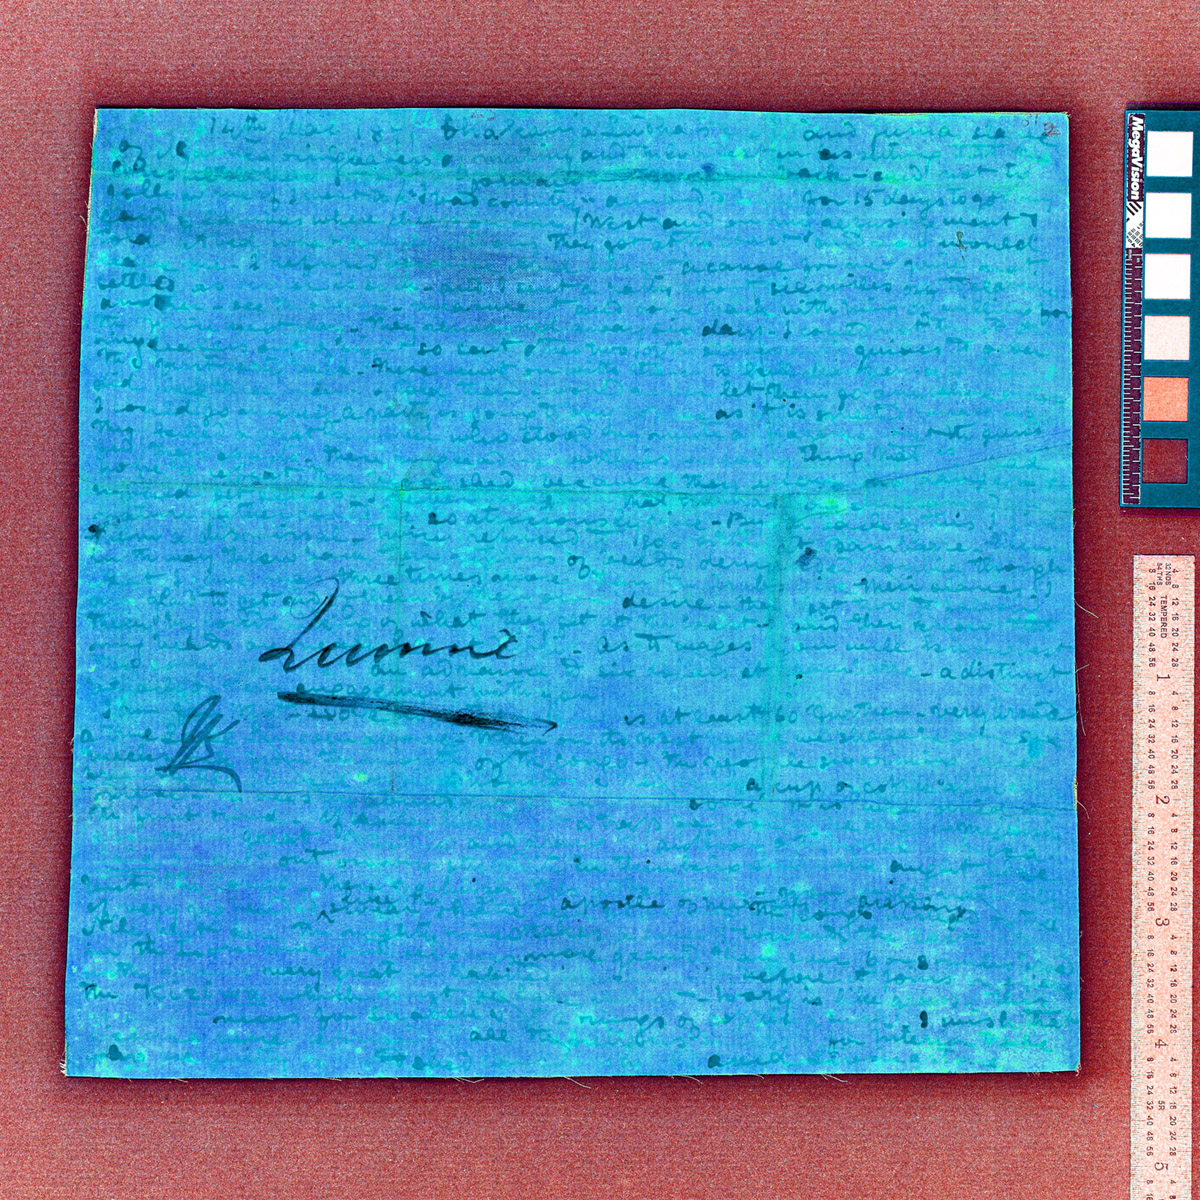 A custom processed spectral image of a page from Livingstone's letter to John Kirk 2, 14 May 1871  (Livingstone 1871i:[1] spectral_ratio, with hue rotated to -46). Copyright National Library of Scotland and, as relevant, Neil Imray Livingstone Wilson. Creative Commons Attribution-NonCommercial 3.0 Unported (https://creativecommons.org/licenses/by-nc/3.0/).